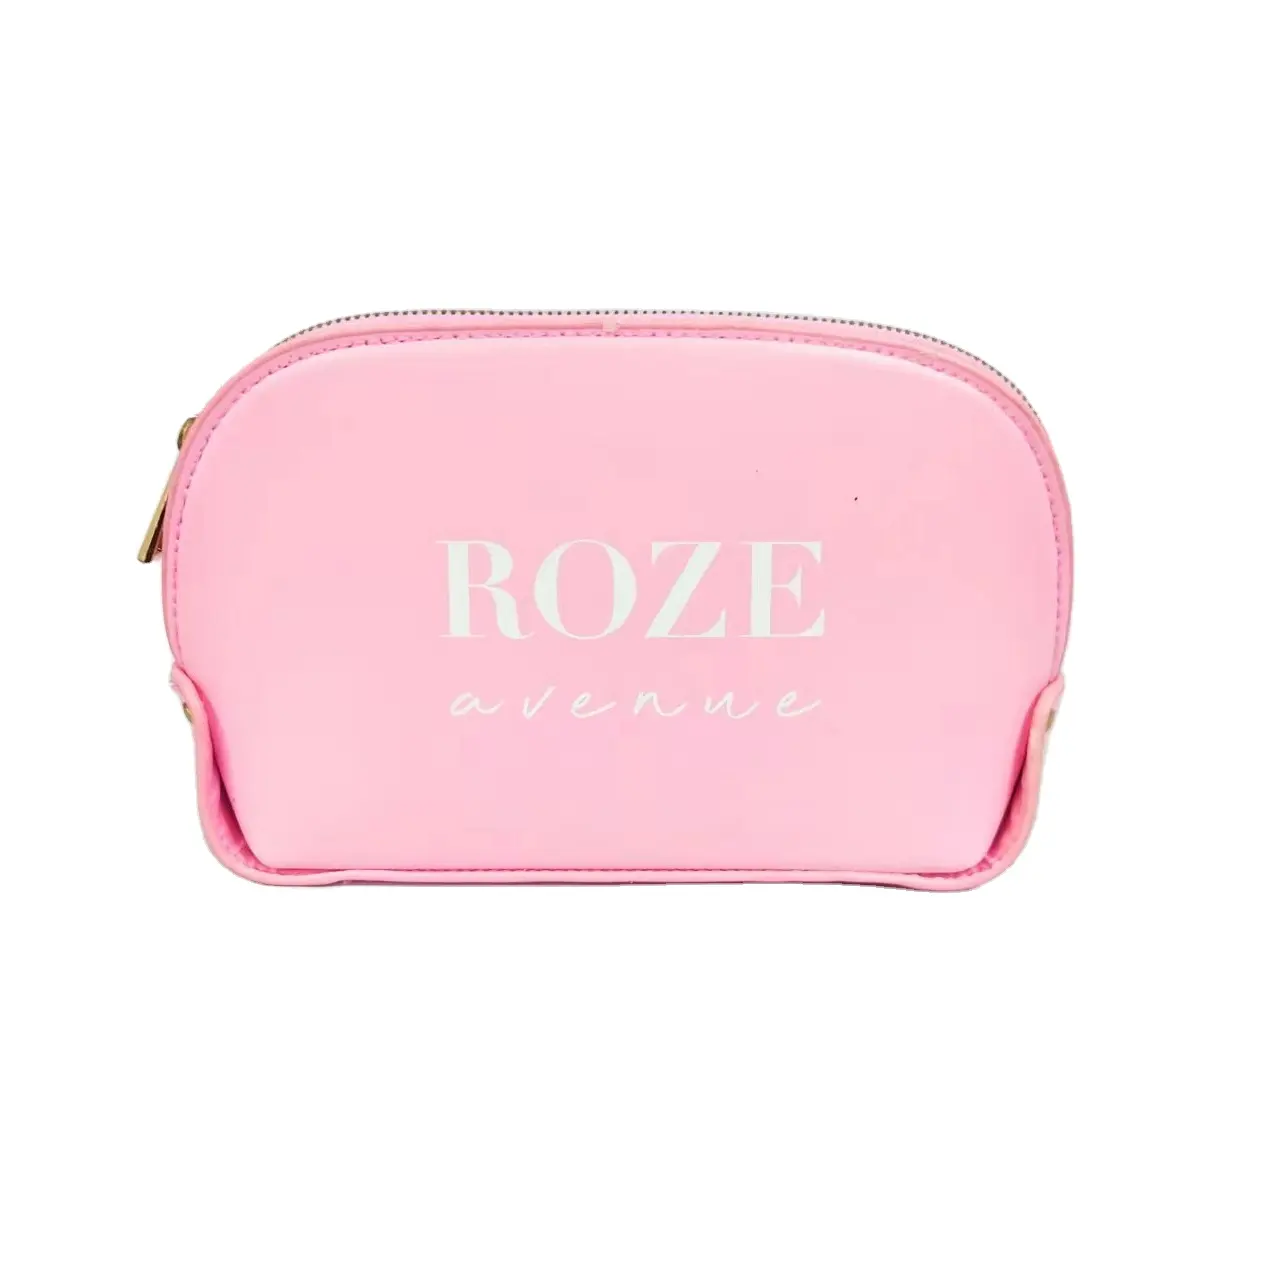 Pu Makeup Case For Women Makeup pouch clear cosmetic case bag with zipper leather makeup bag travel cosmetic bag waterproof